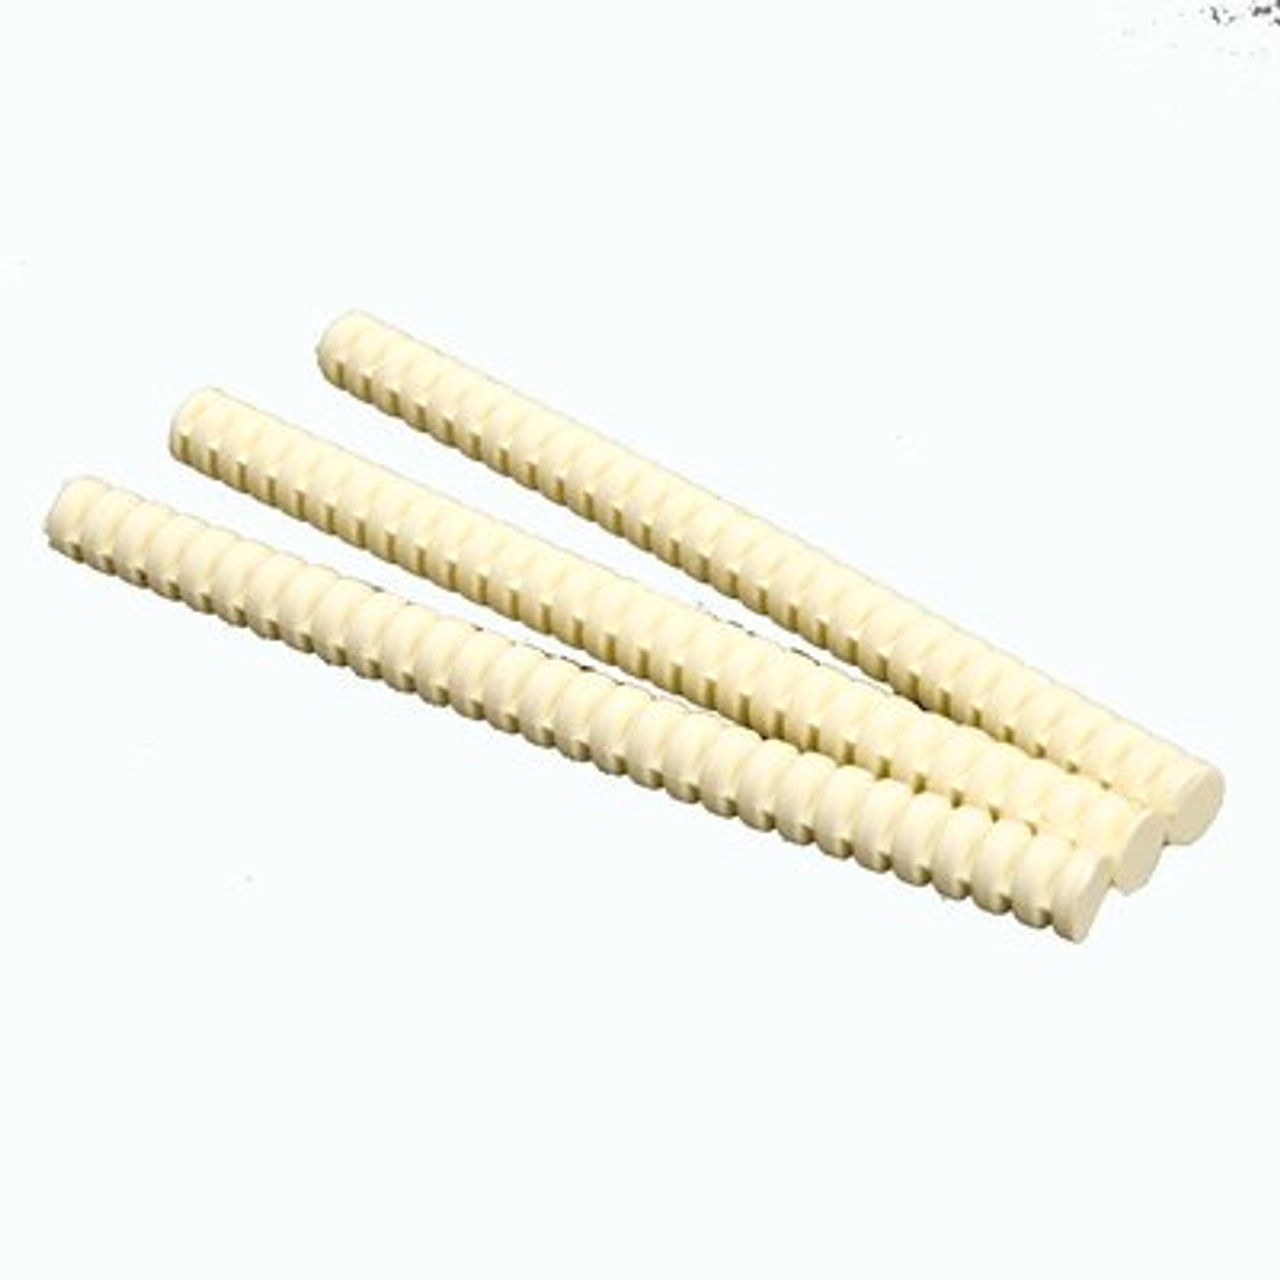 3M™ Hot Melt Adhesive 3748 V0 TC, Light Yellow, 5/8 in x 2 in